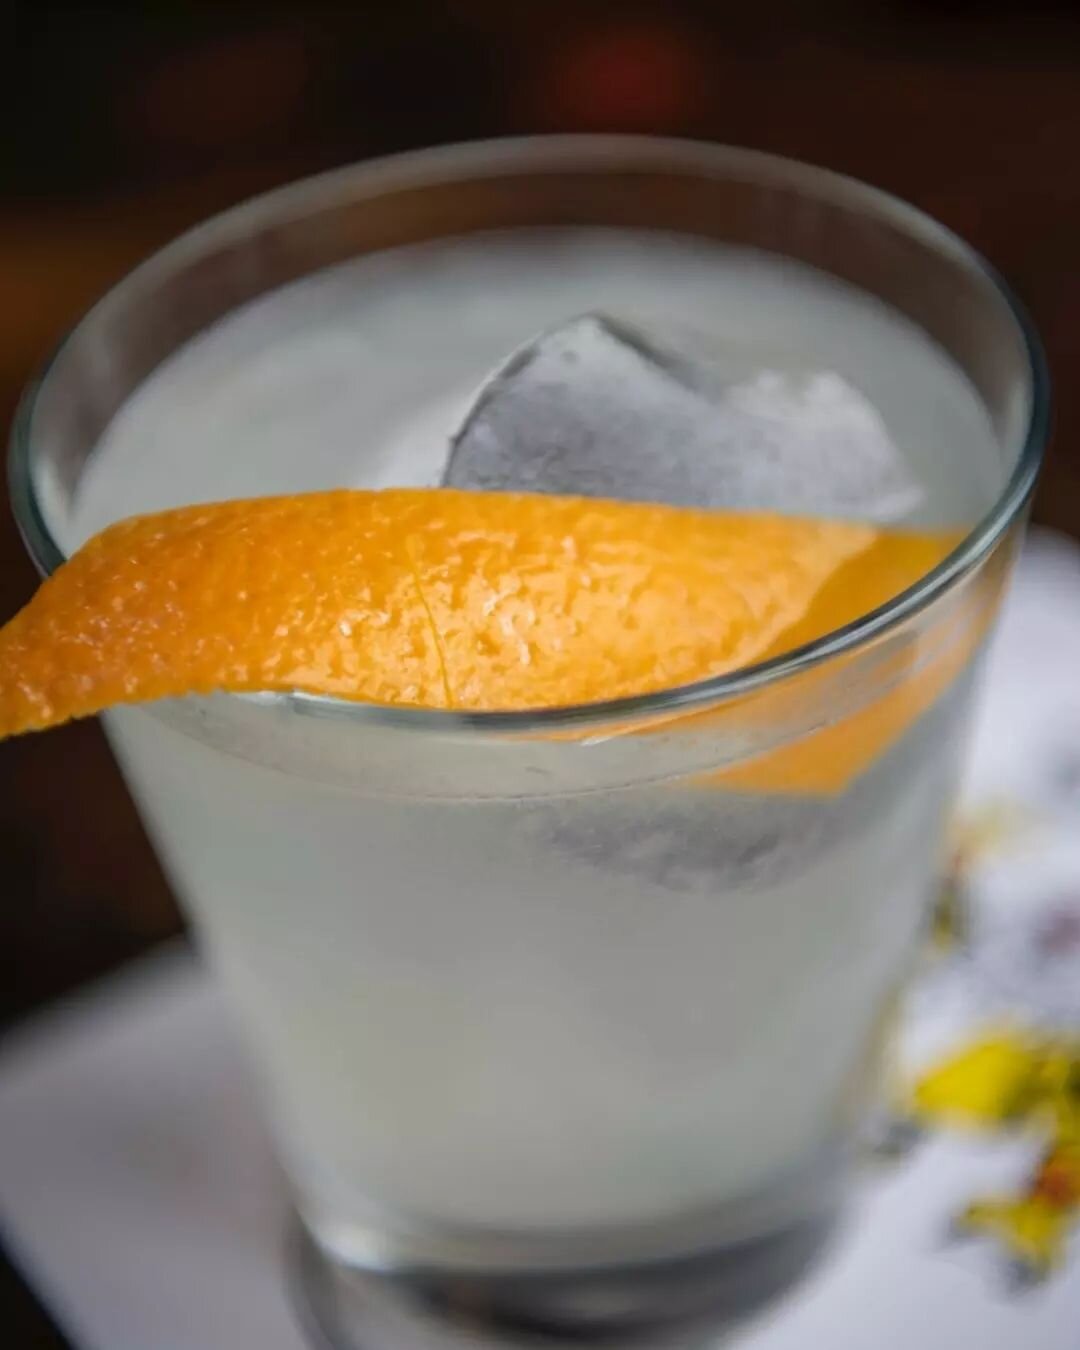 GIN RUMMY // gin, rum, lime, velvet falernum, fresh lime, orange bitters. Come try this incredible cocktail tonight at Frazer's! Offering dine-in and carryout from 5-10pm.
.
MAKE YOUR RESERVATION AT:  https://www.opentable.com/frazers-restaurant-and-